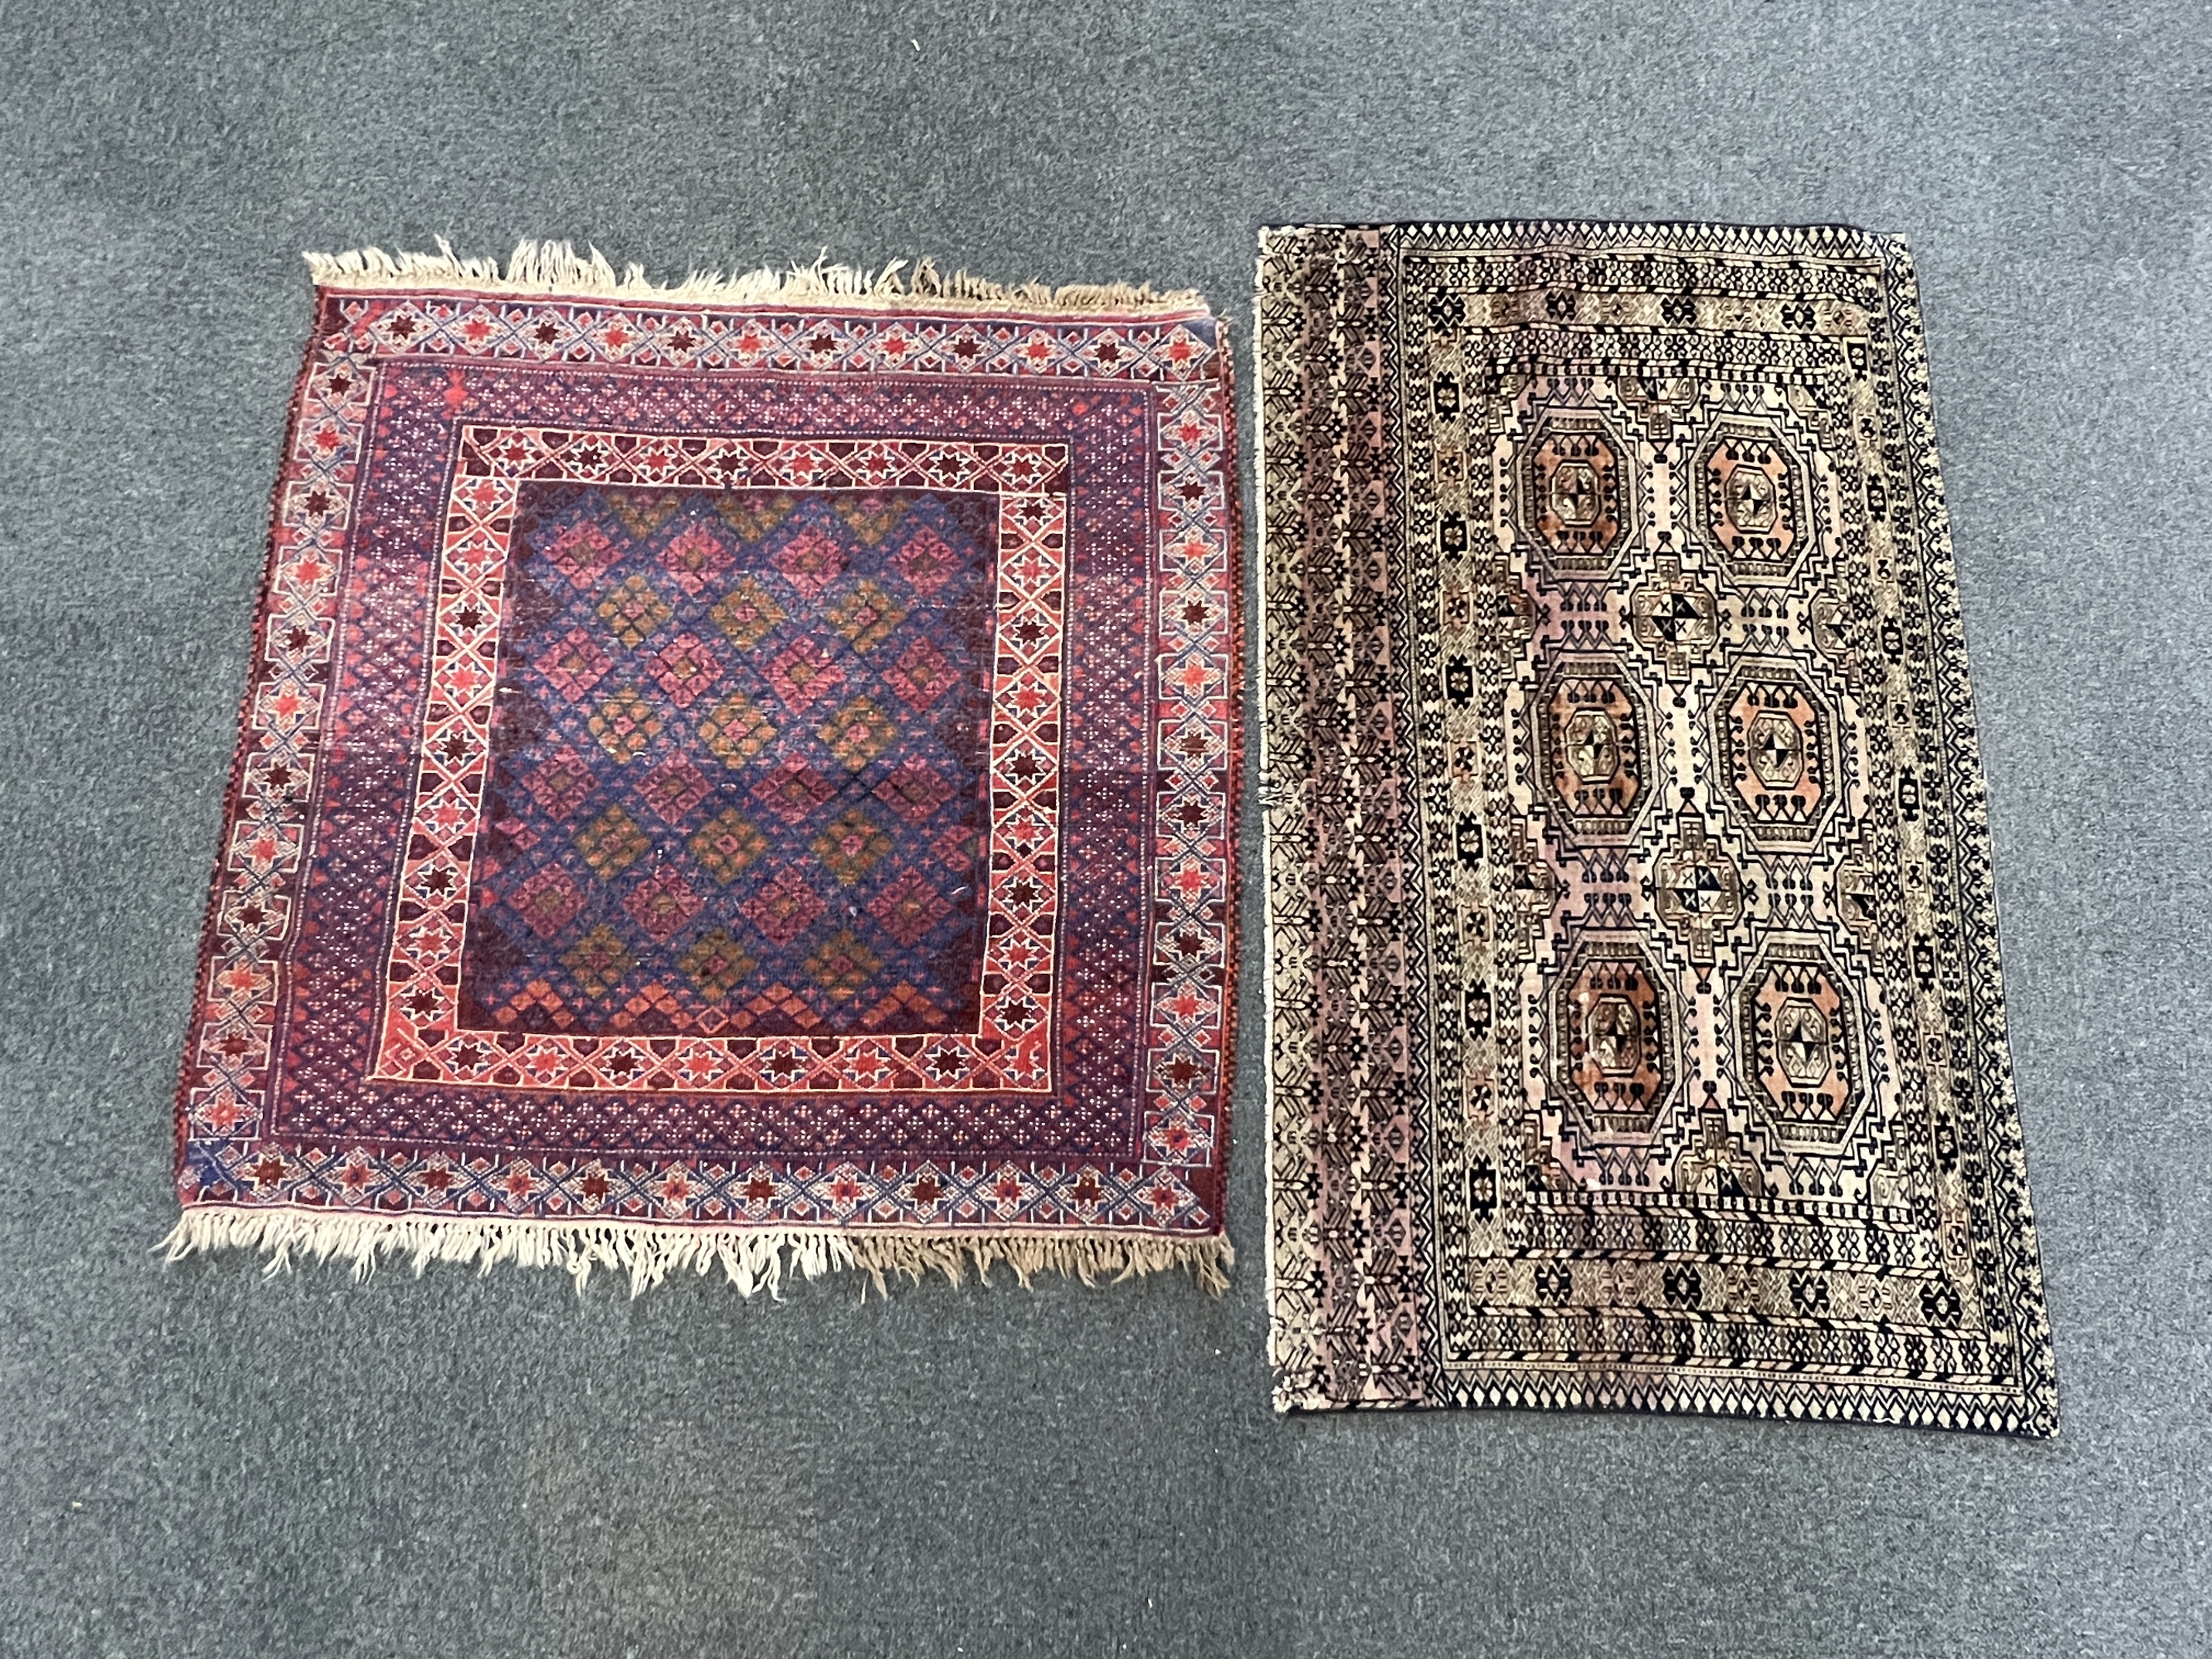 Two Afghan rugs / saddlebags, larger 104 x 108cm. Condition - fair